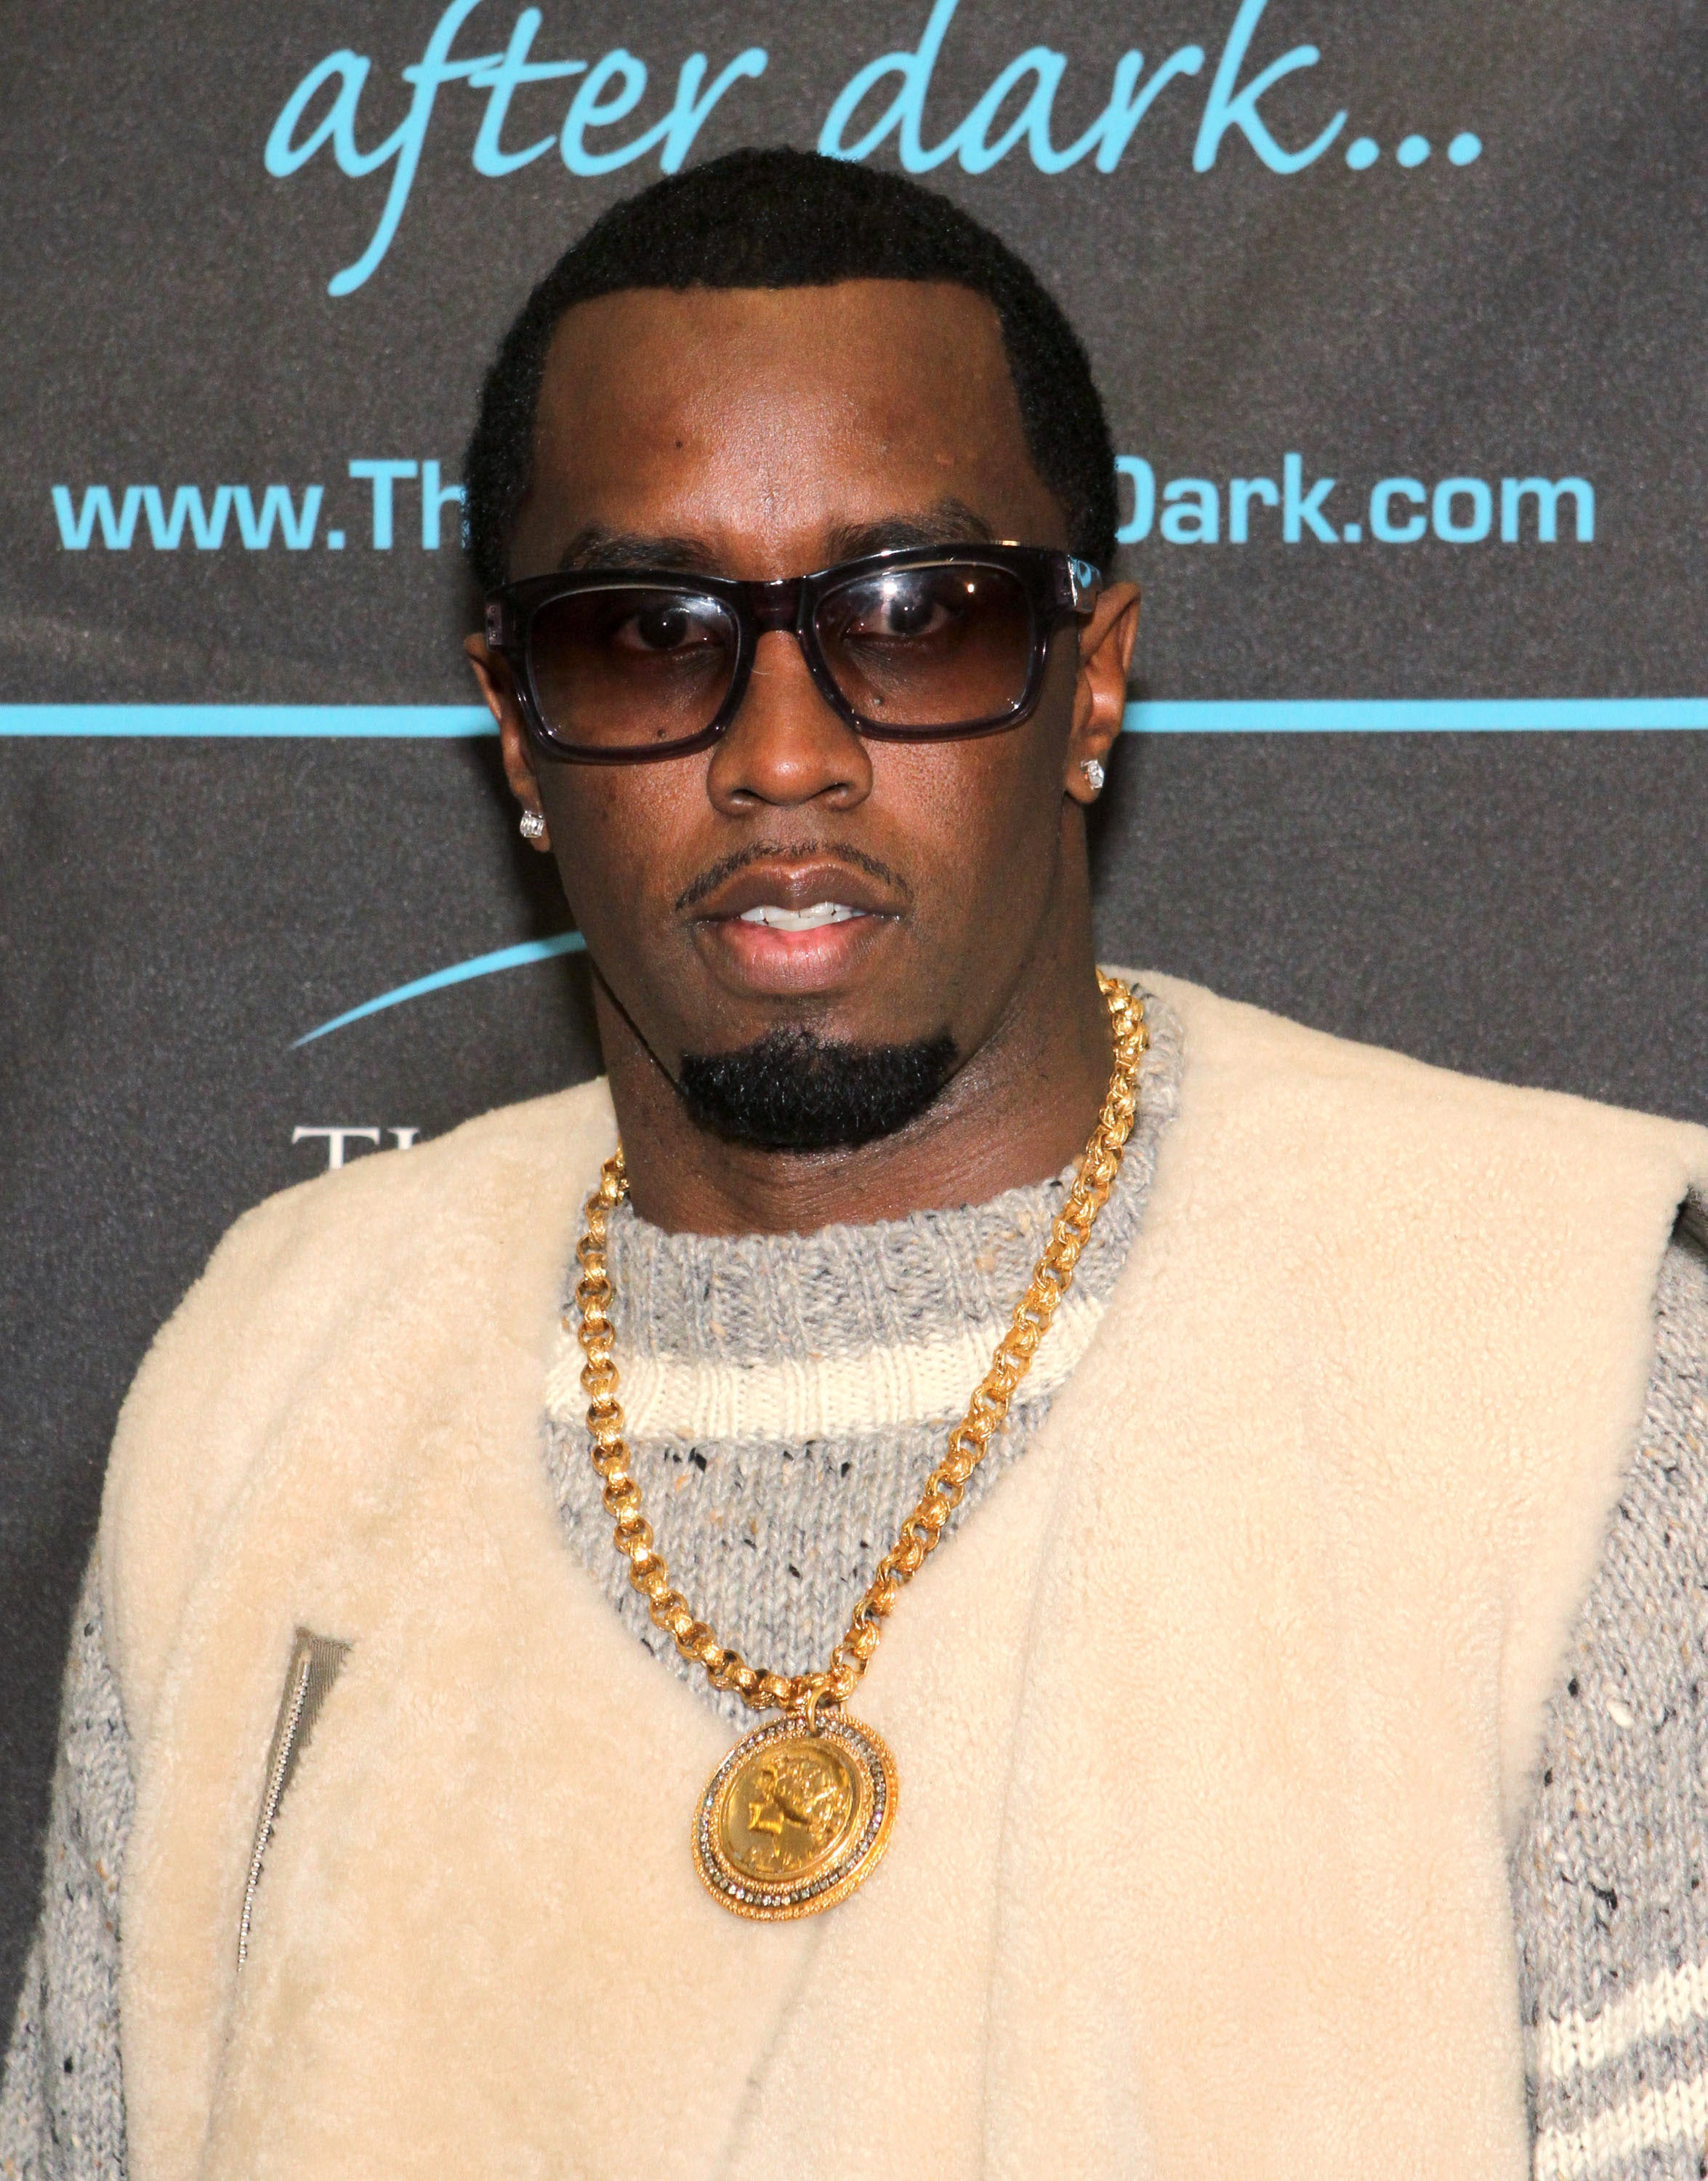 Coffee Talk: Diddy Involved in Car Crash, Suffers Minor Injuries